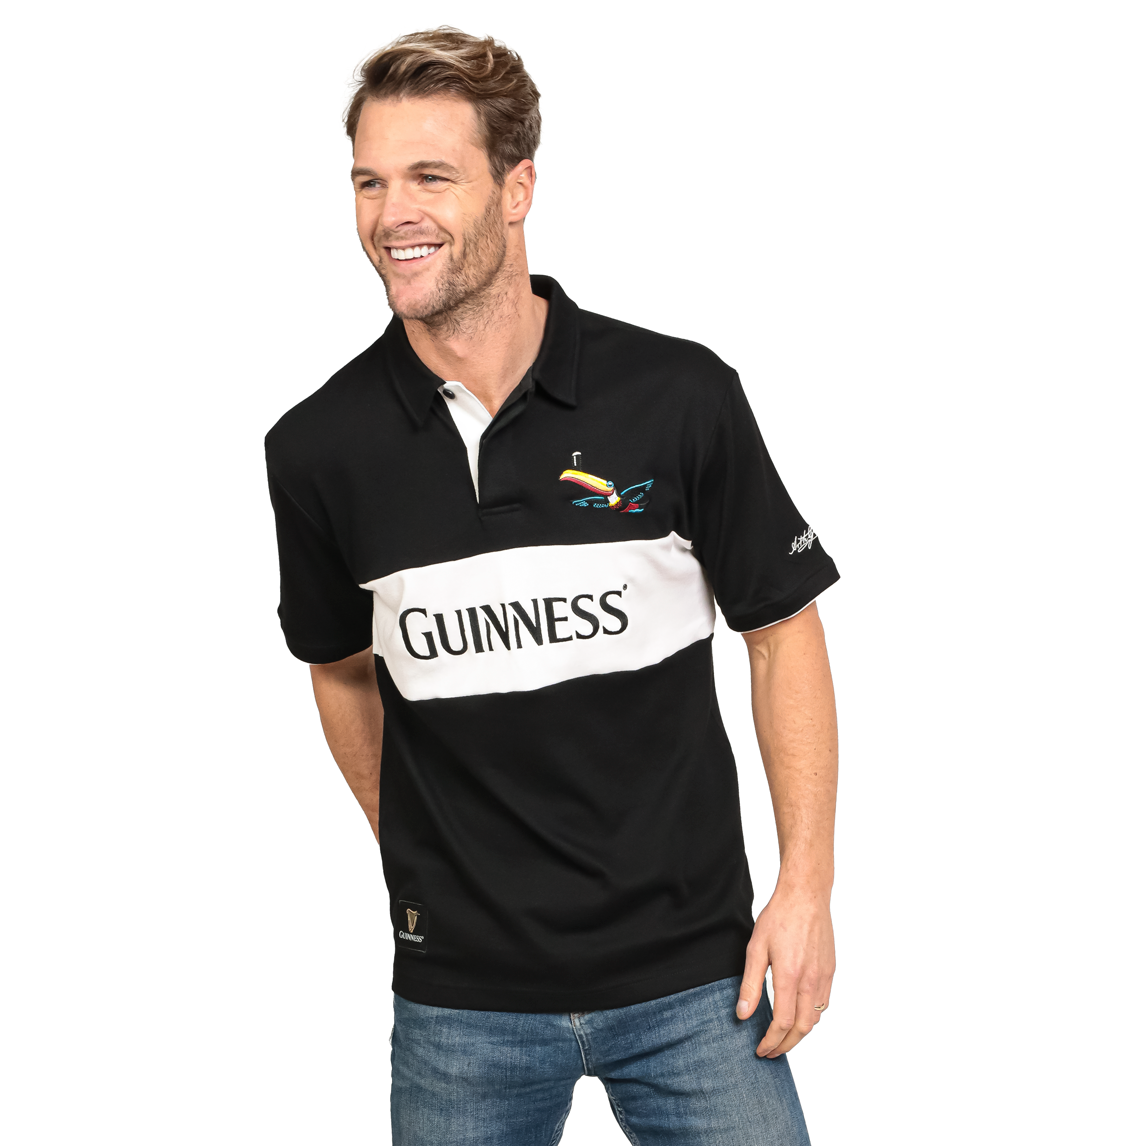 Black and White Guinness Toucan Short Sleeve Rugby men's polo shirt.